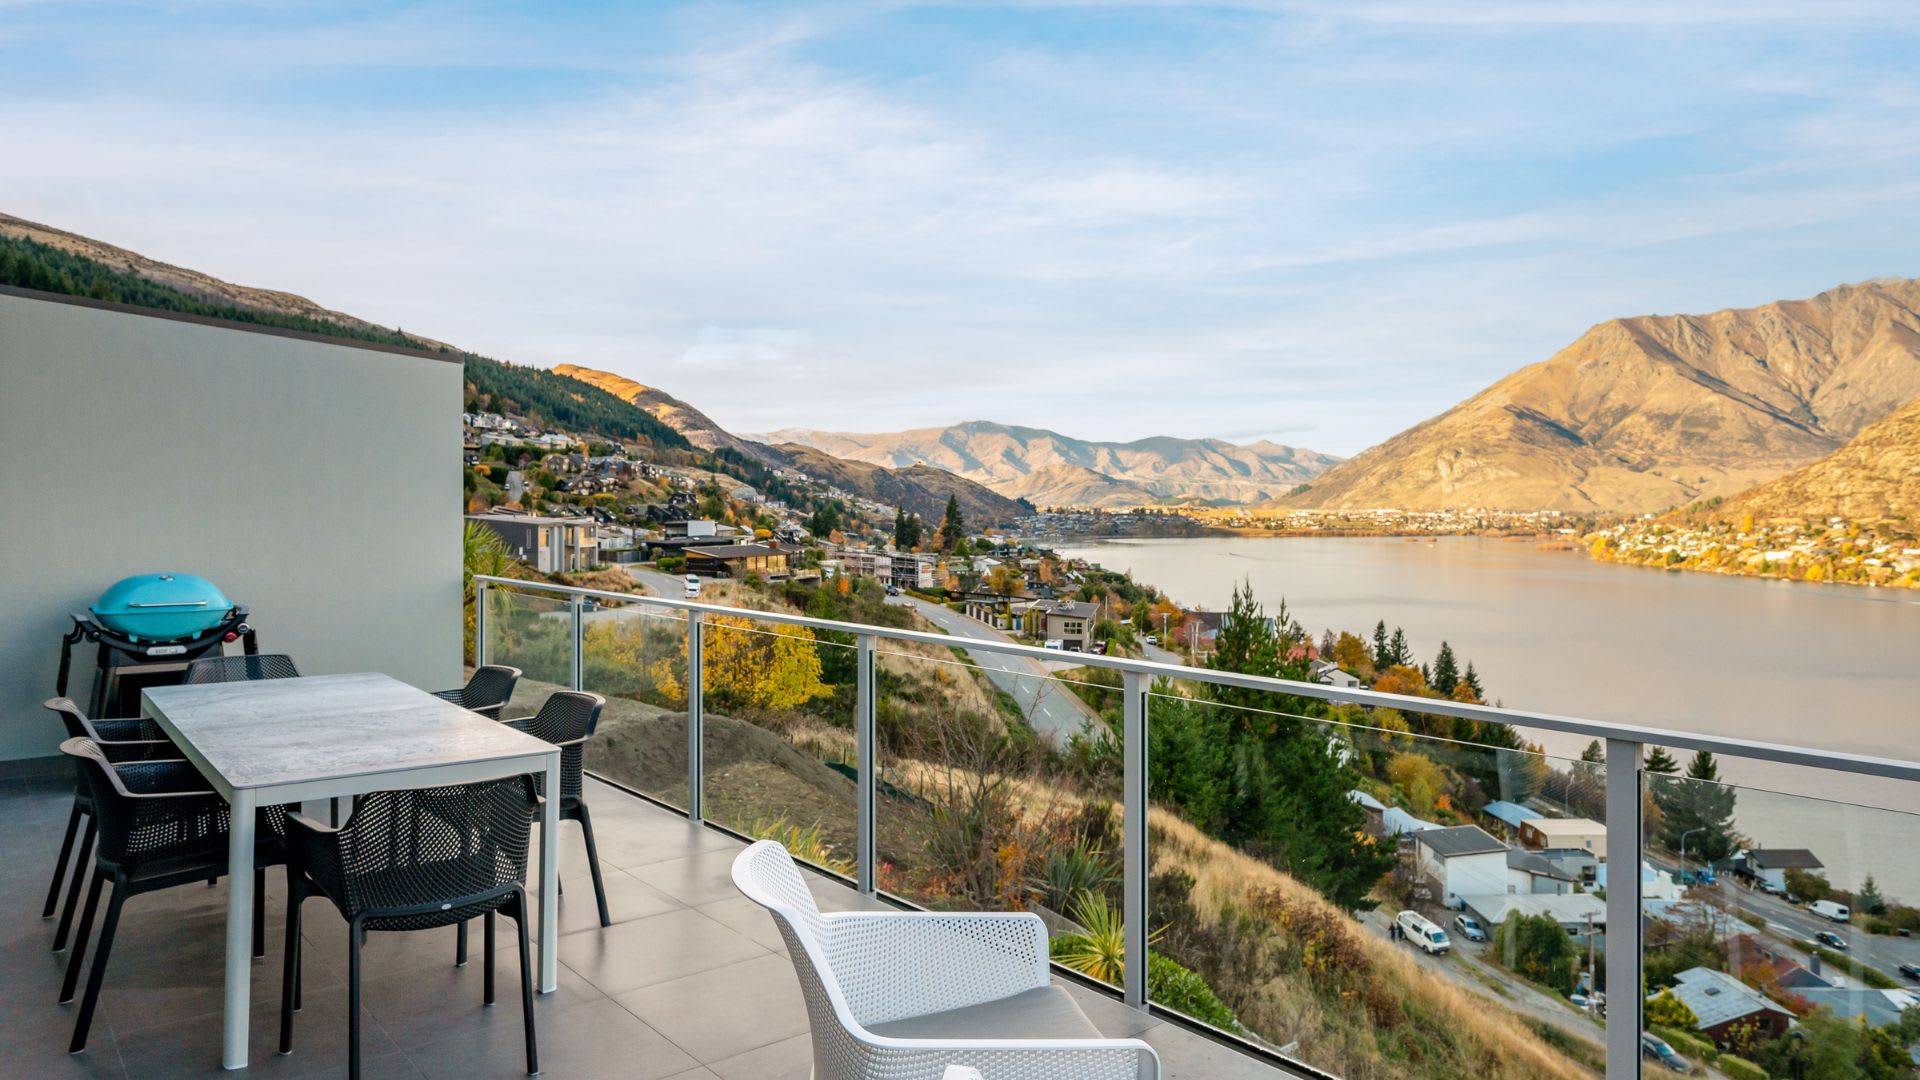 Enjoy an outdoor BBQ in the fresh air when you stay in Queenstown